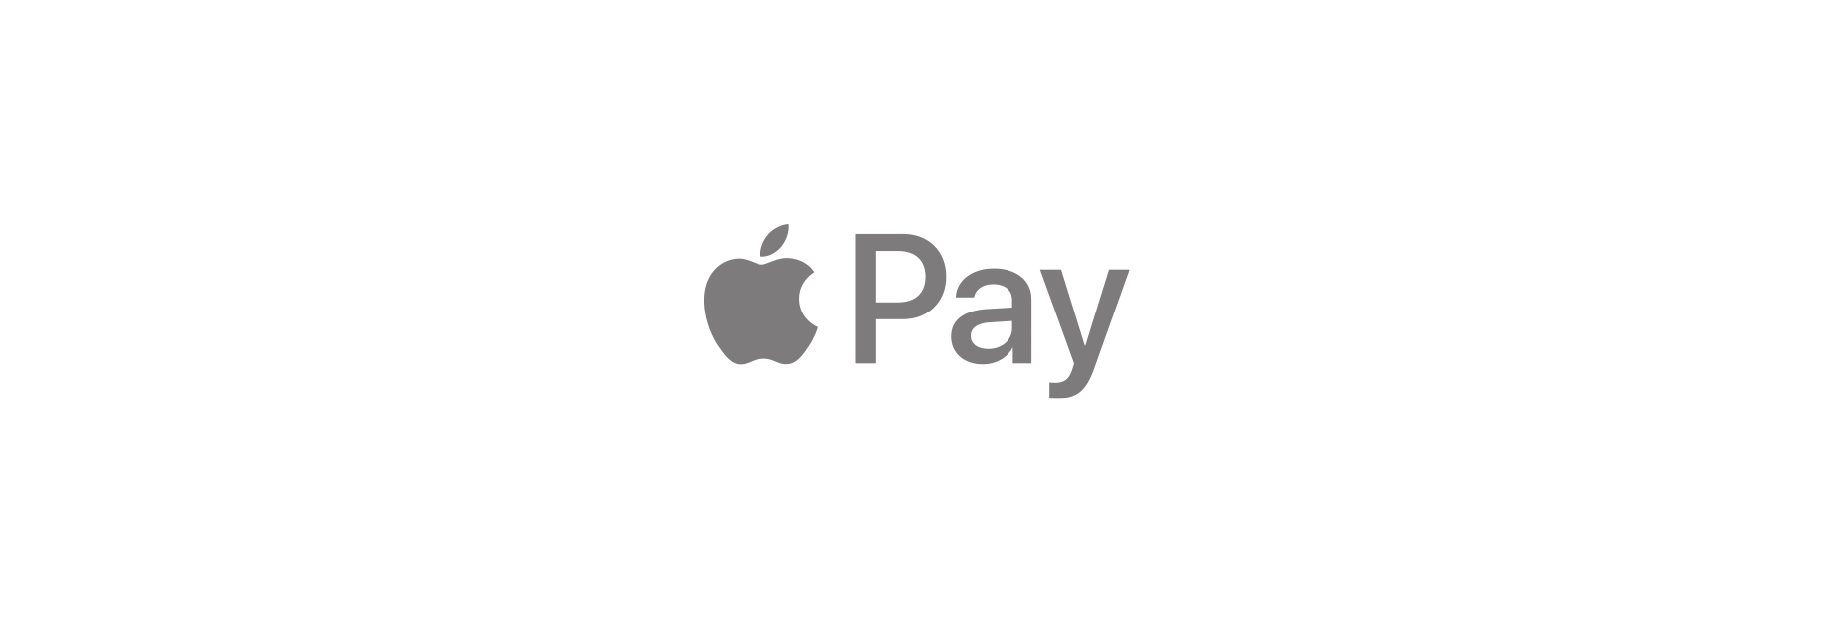 How to set up Apple Pay on iPhone and iPad